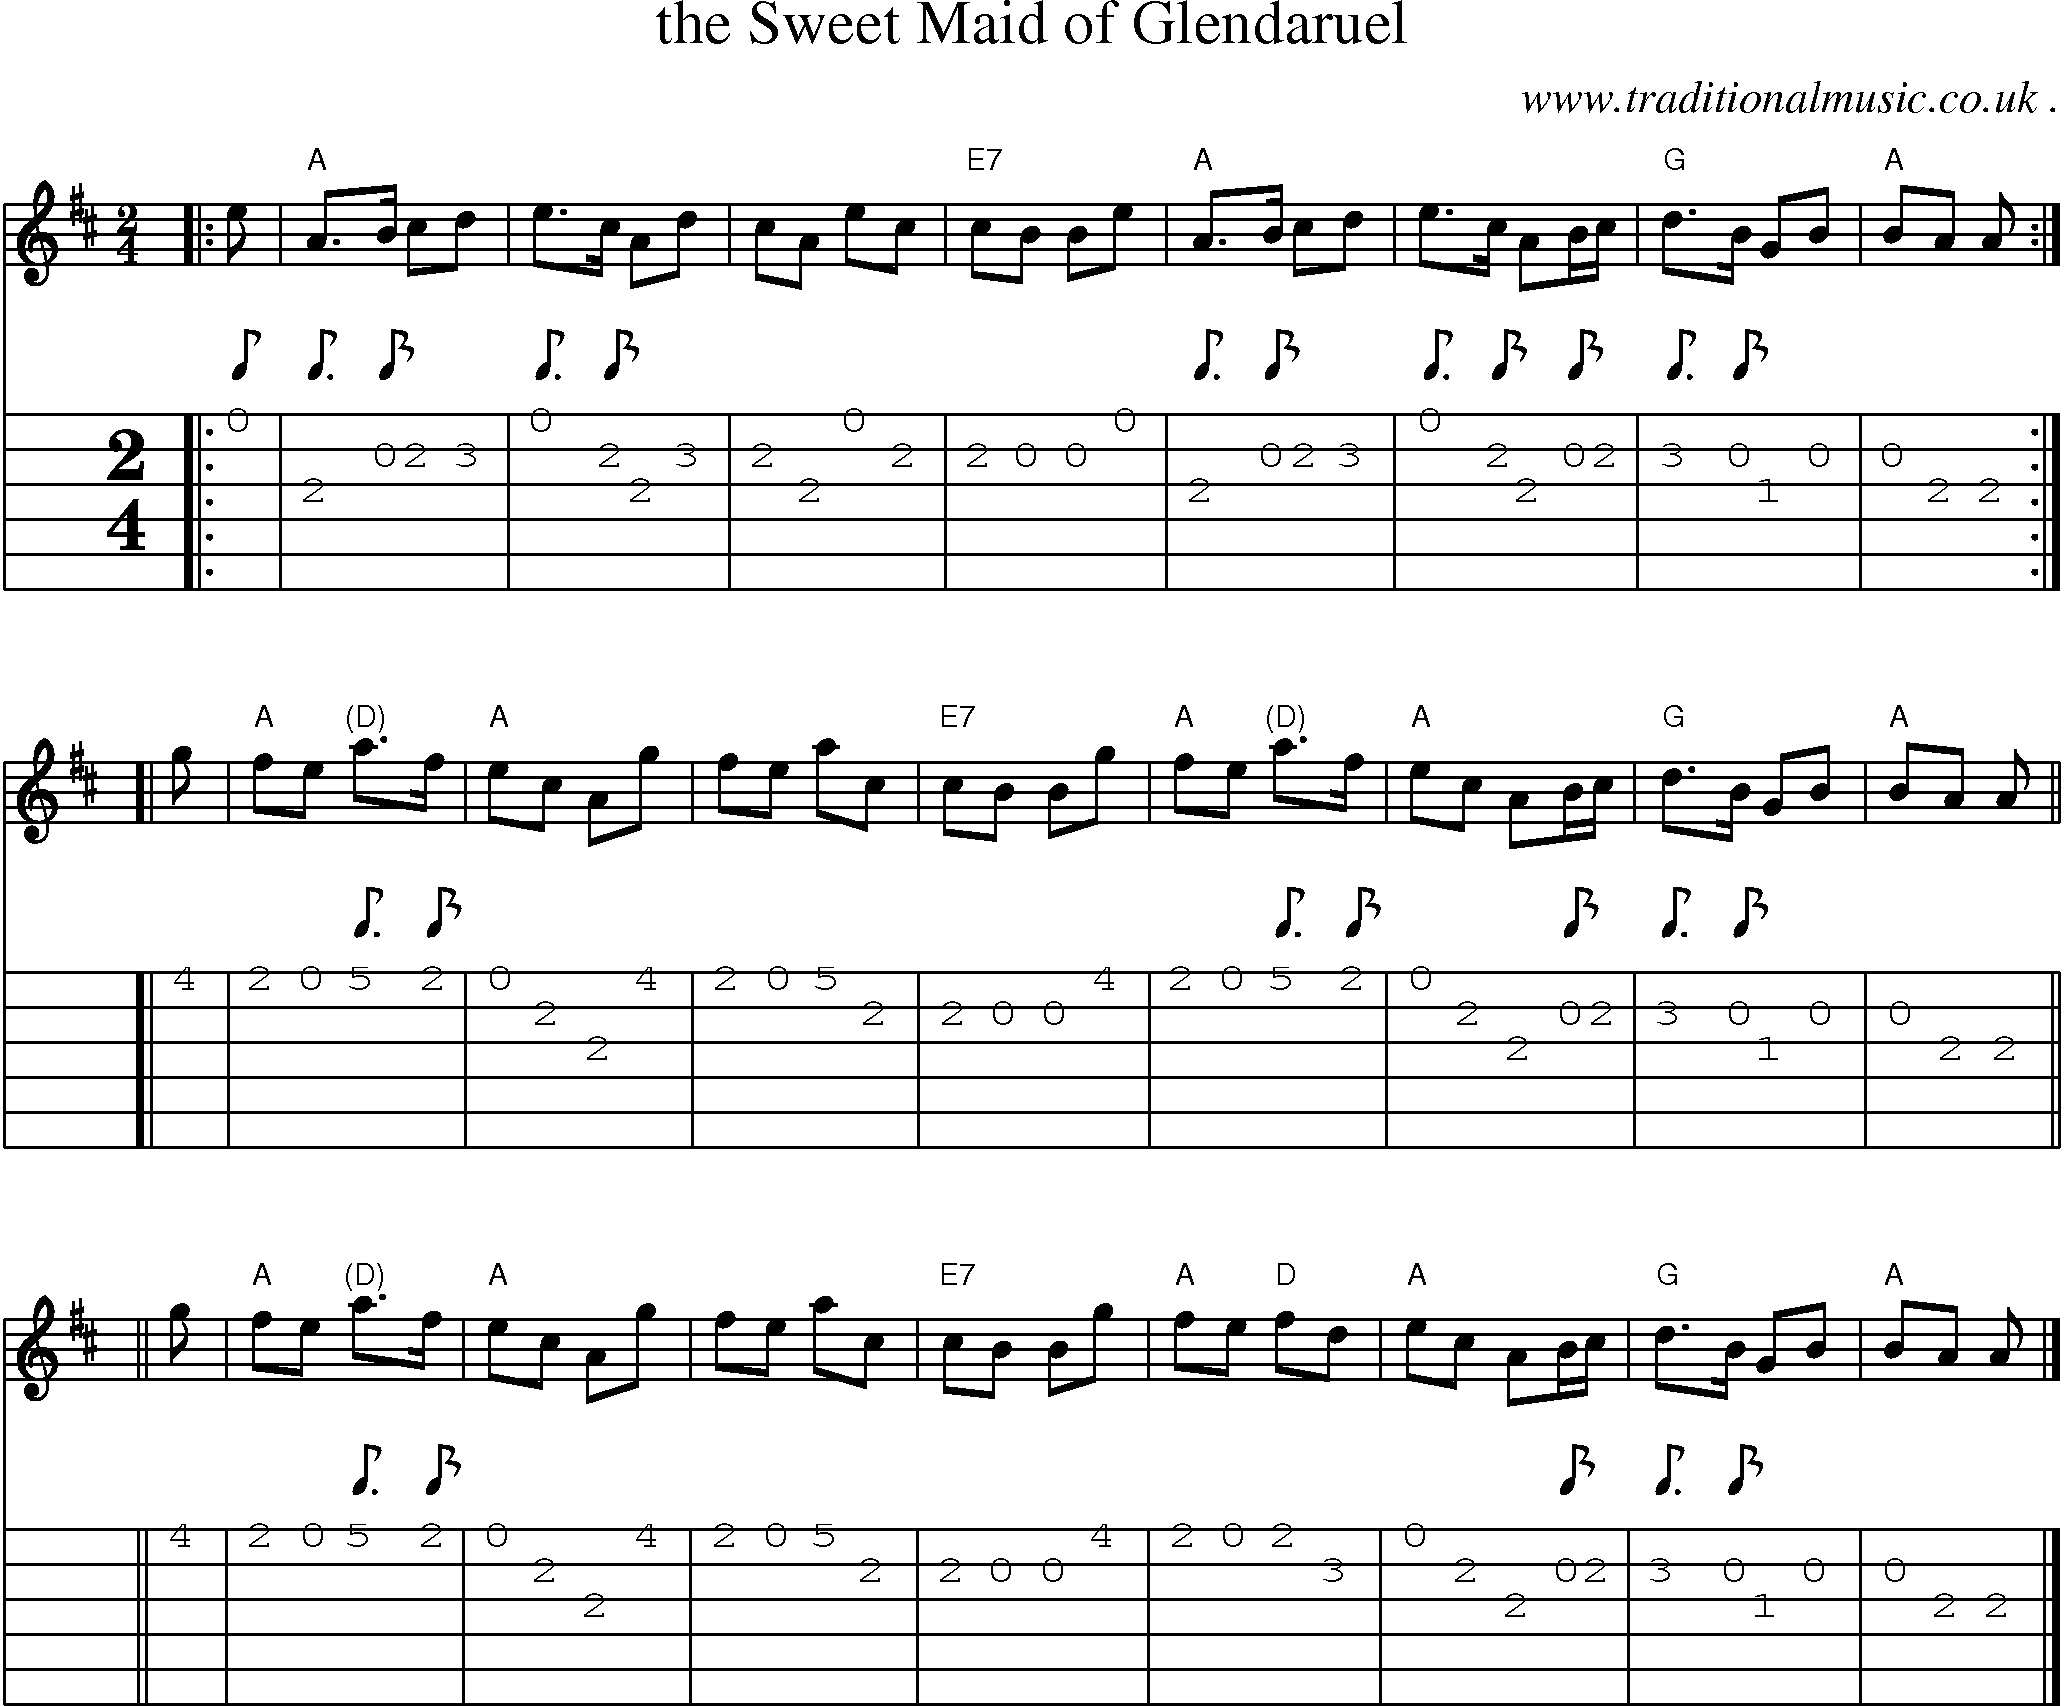 Sheet-music  score, Chords and Guitar Tabs for The Sweet Maid Of Glendaruel